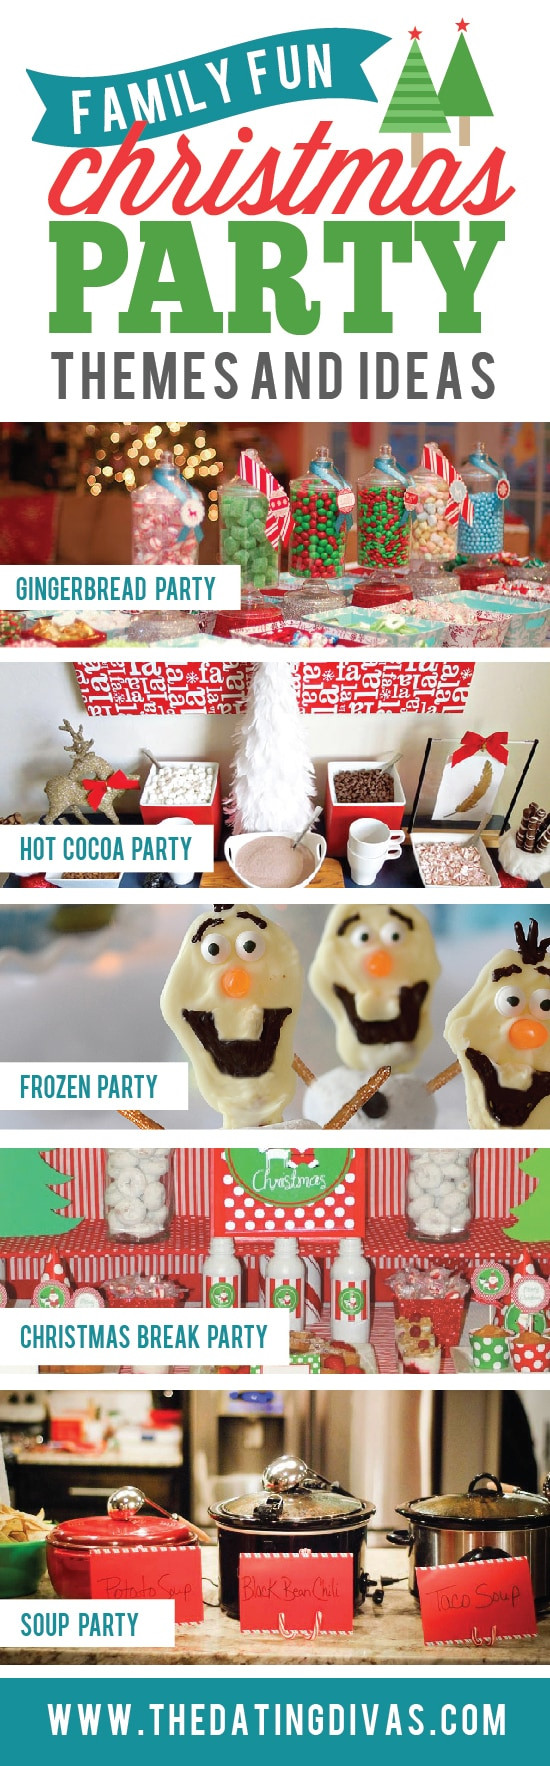 Family Christmas Party Ideas
 15 Christmas Party Themes From the Dating Divas